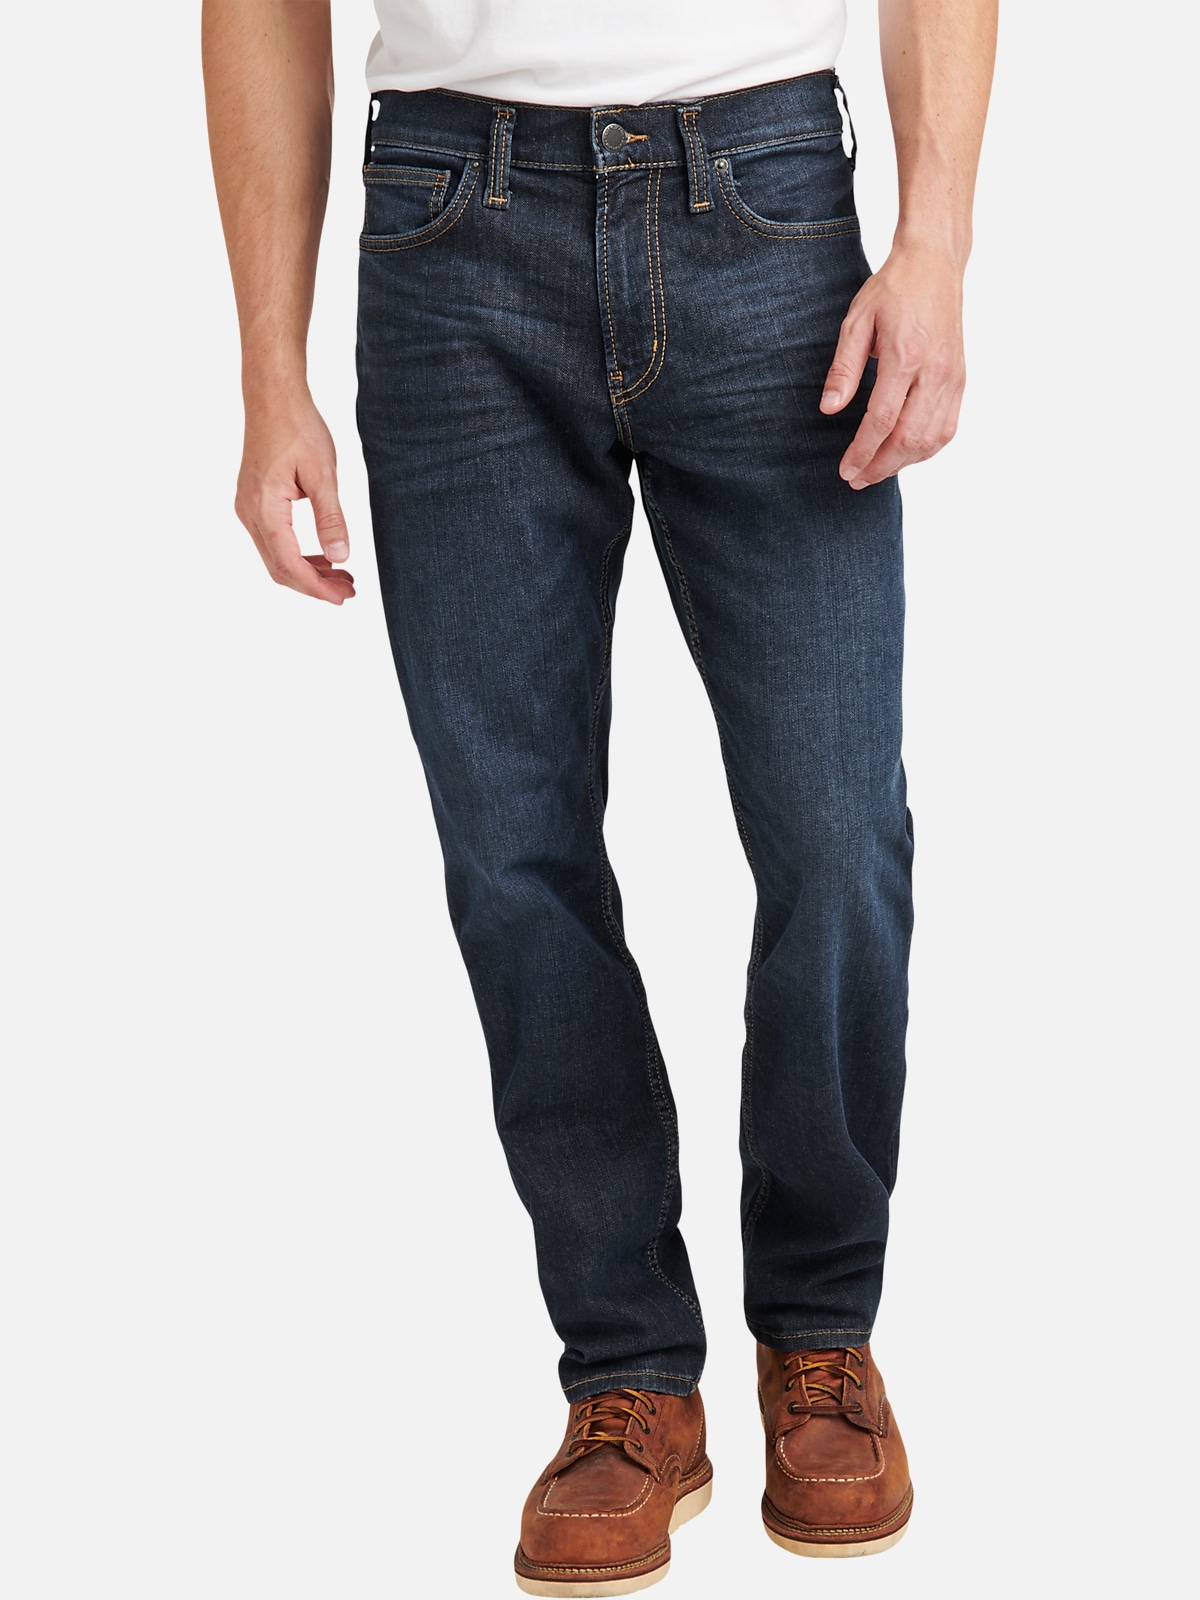 Silver Jeans Athletic Fit Tapered Leg Jeans | All Sale| Men's Wearhouse